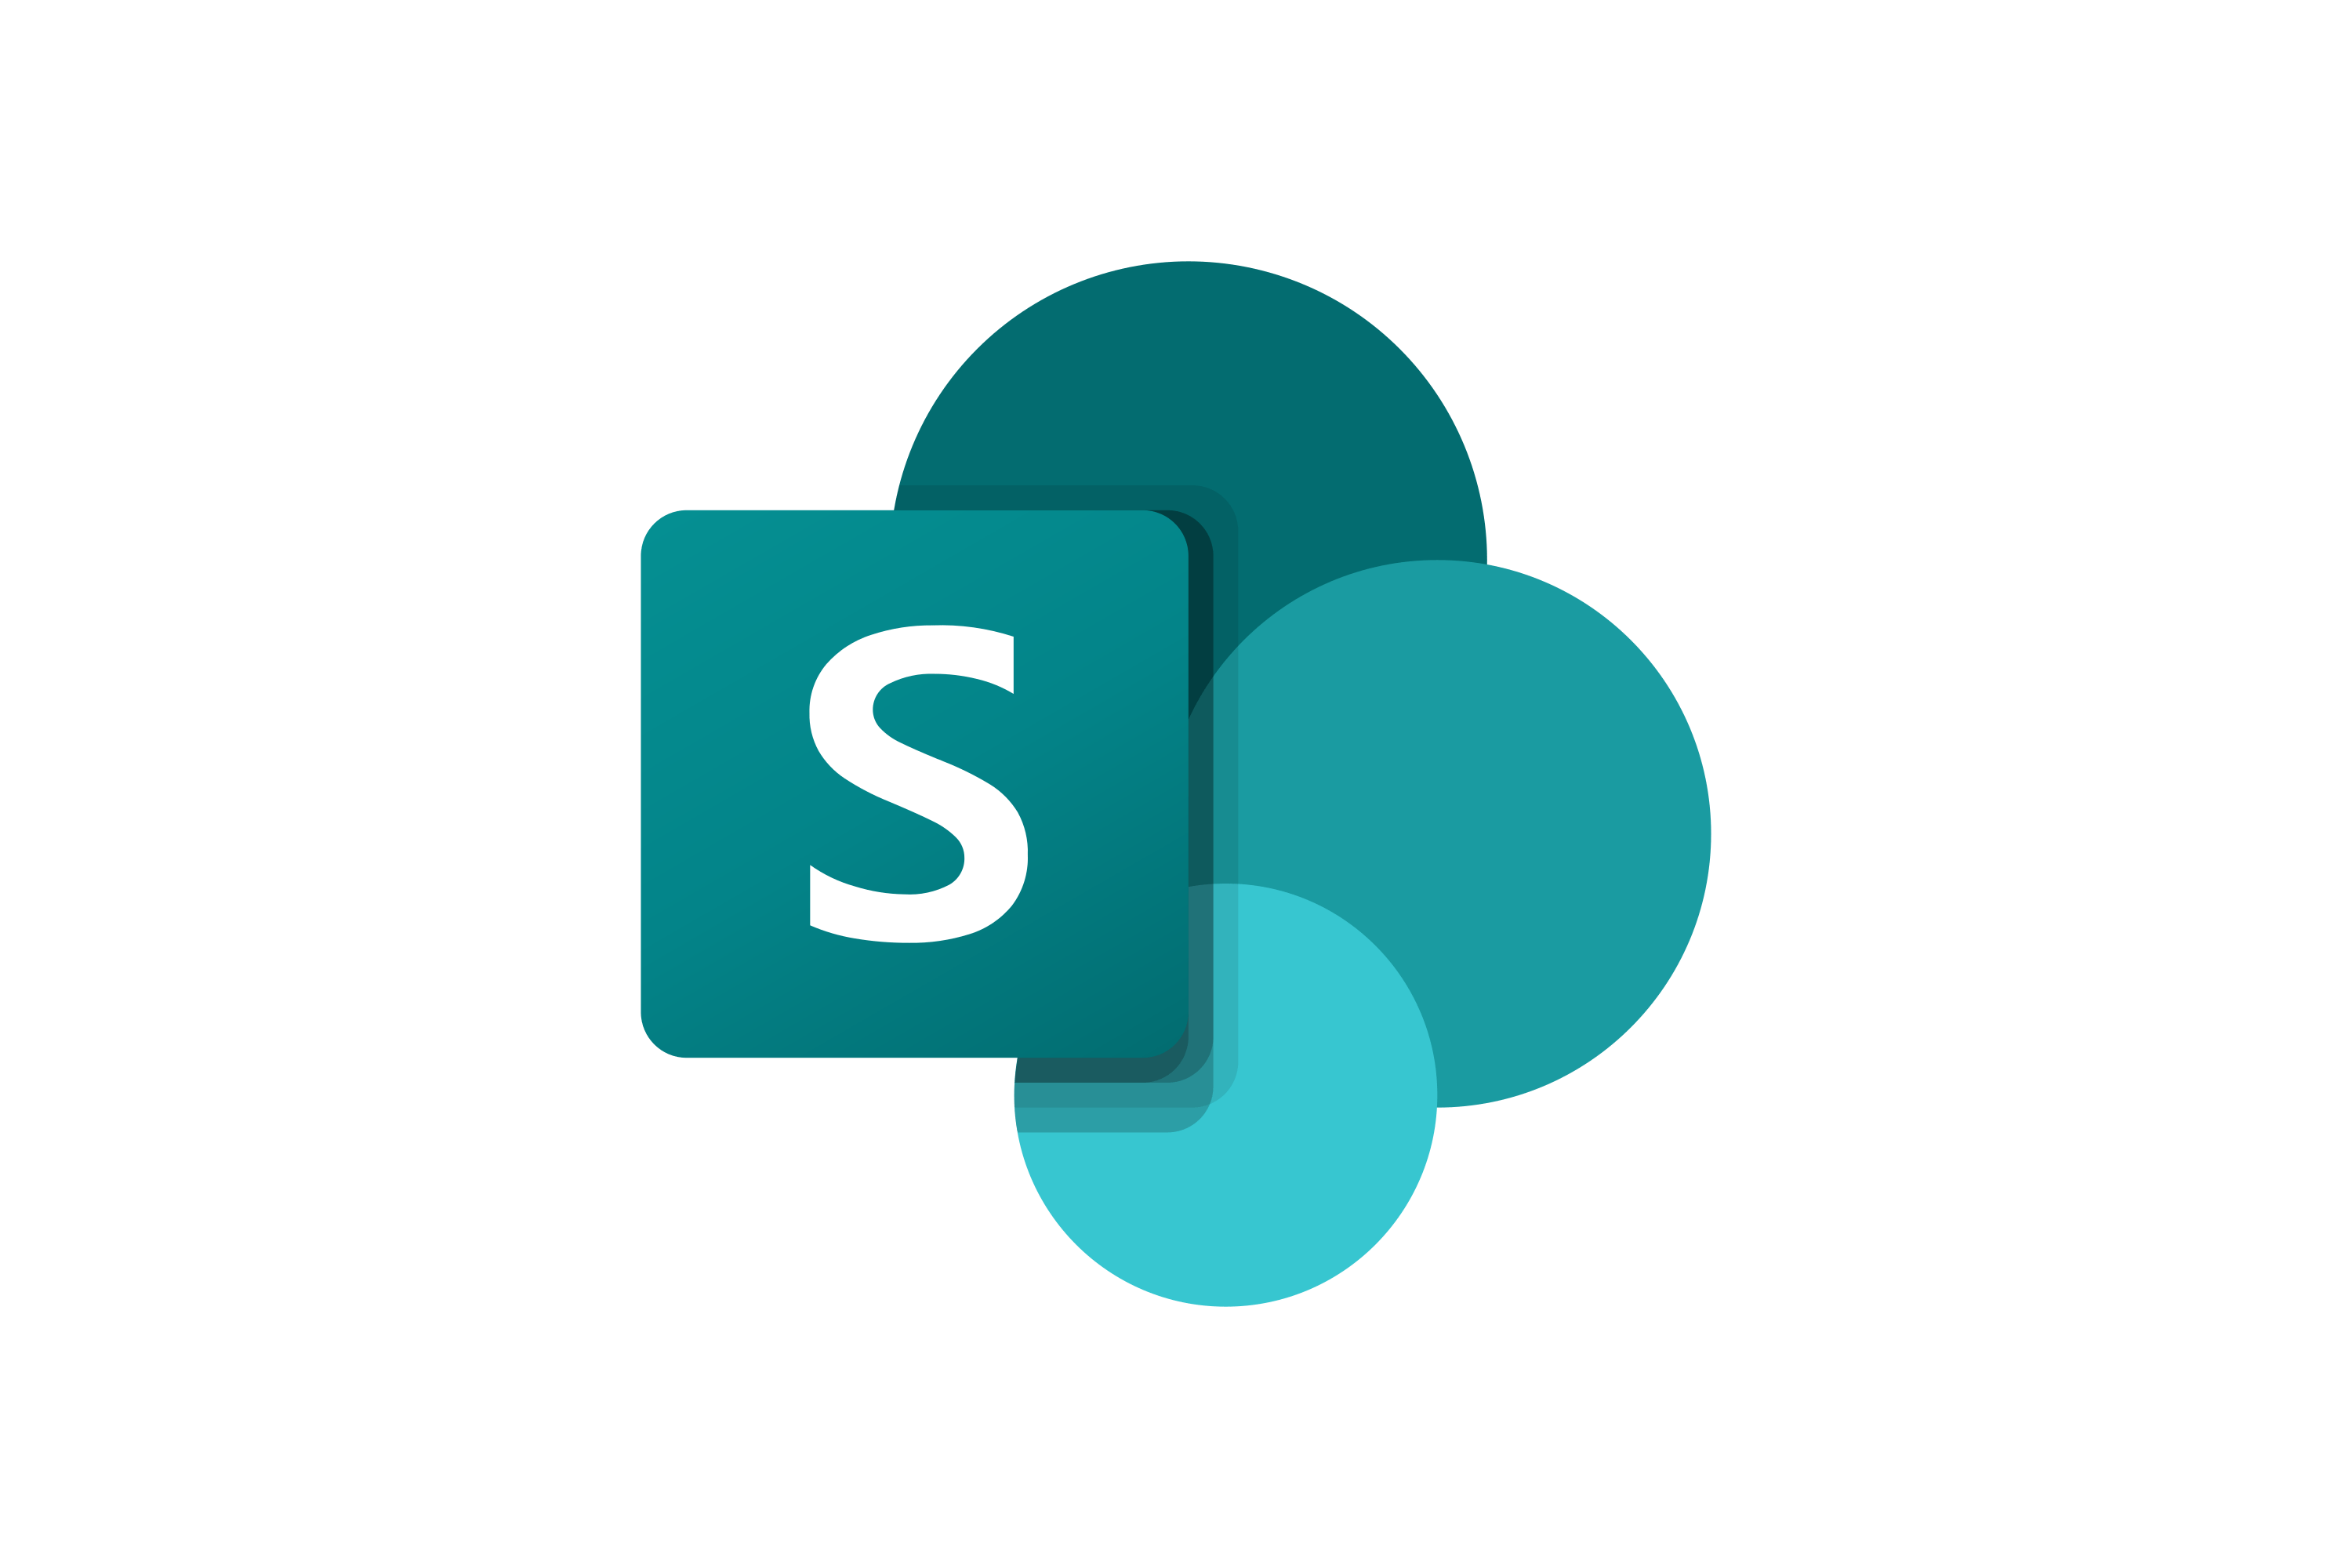 Download Microsoft SharePoint Logo in SVG Vector or PNG File Format - Logo .wine